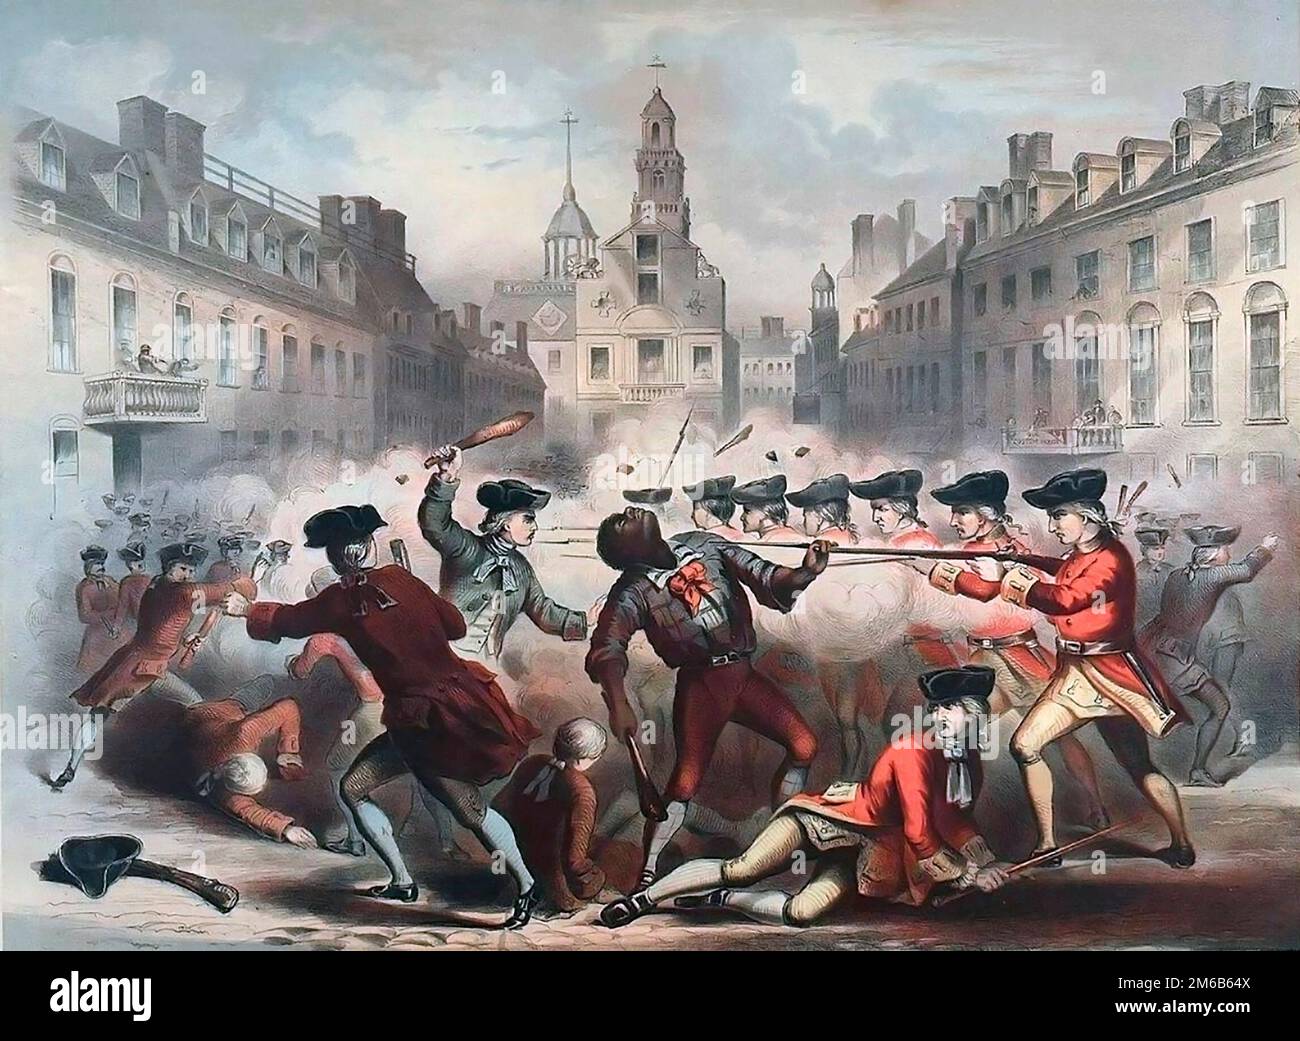 Crispus Attucks (c. 1723 -1770). Illustration of the Boston Massacre in 1770, showing the killing of Crispus Attucks, from a painting by William L. Champney, lithograph by J. H. Bufford (lithographer), 1856 Stock Photo